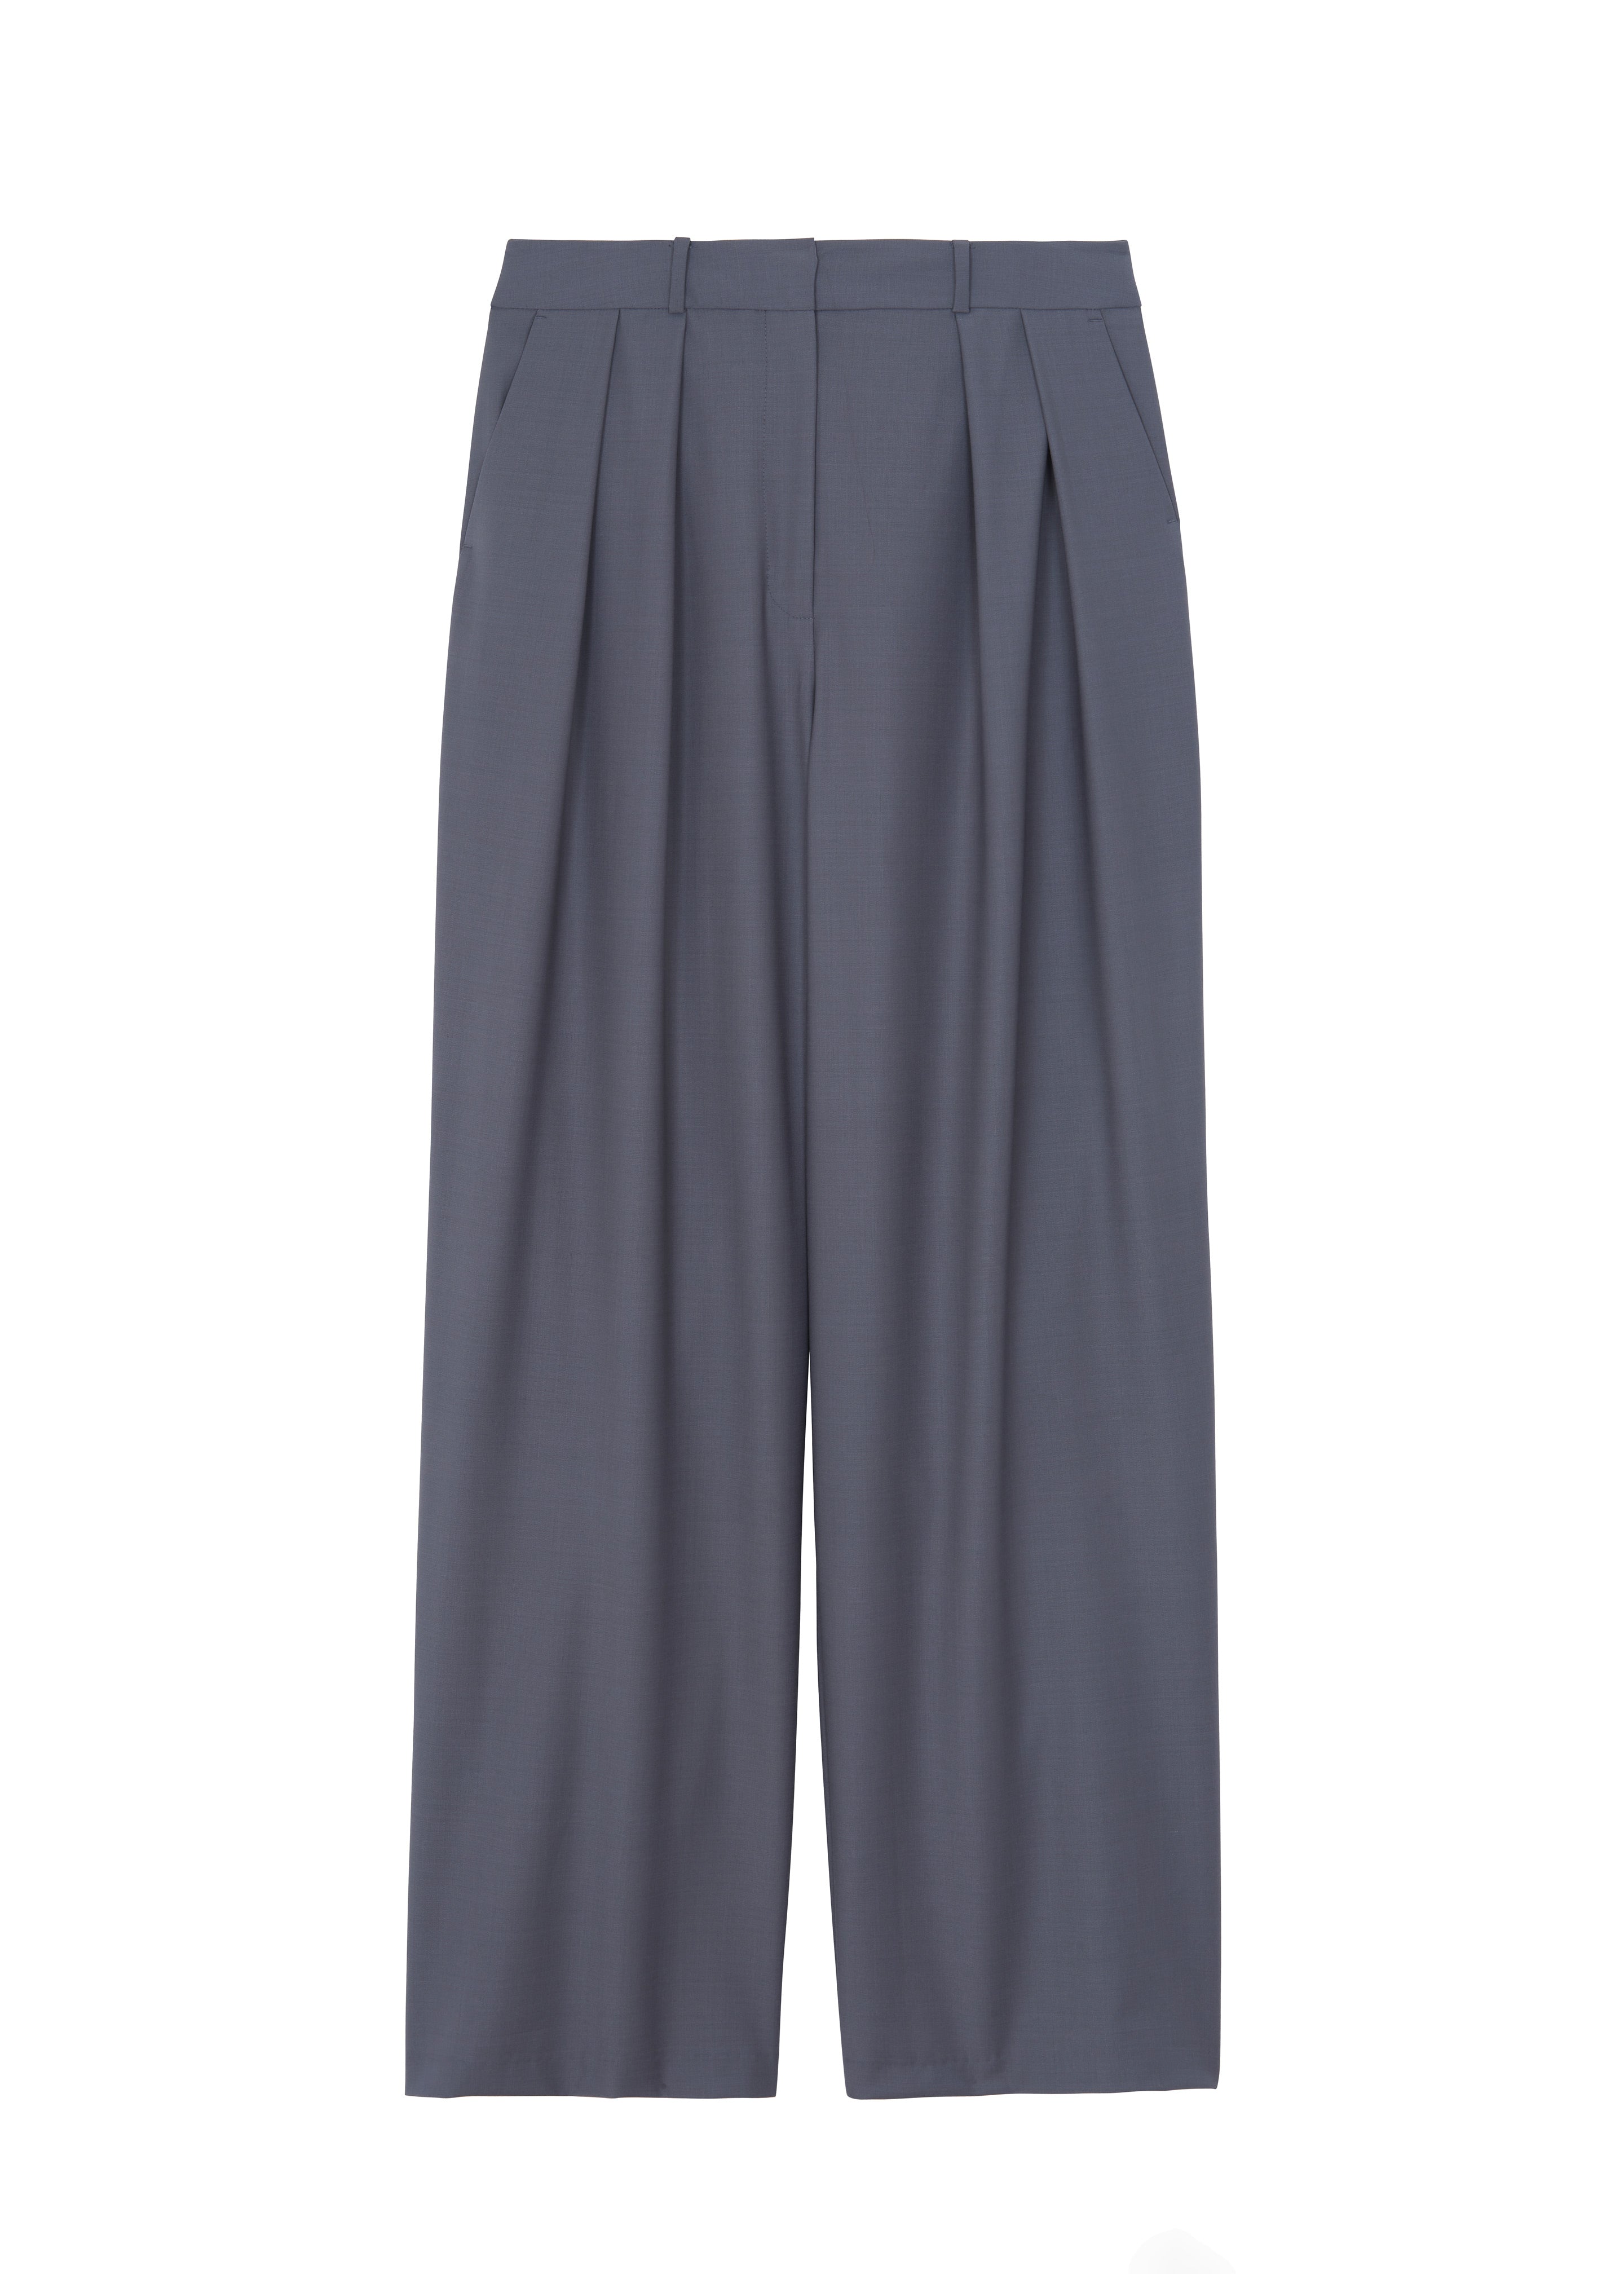 Ripley Pleated Trousers - Grey - 12